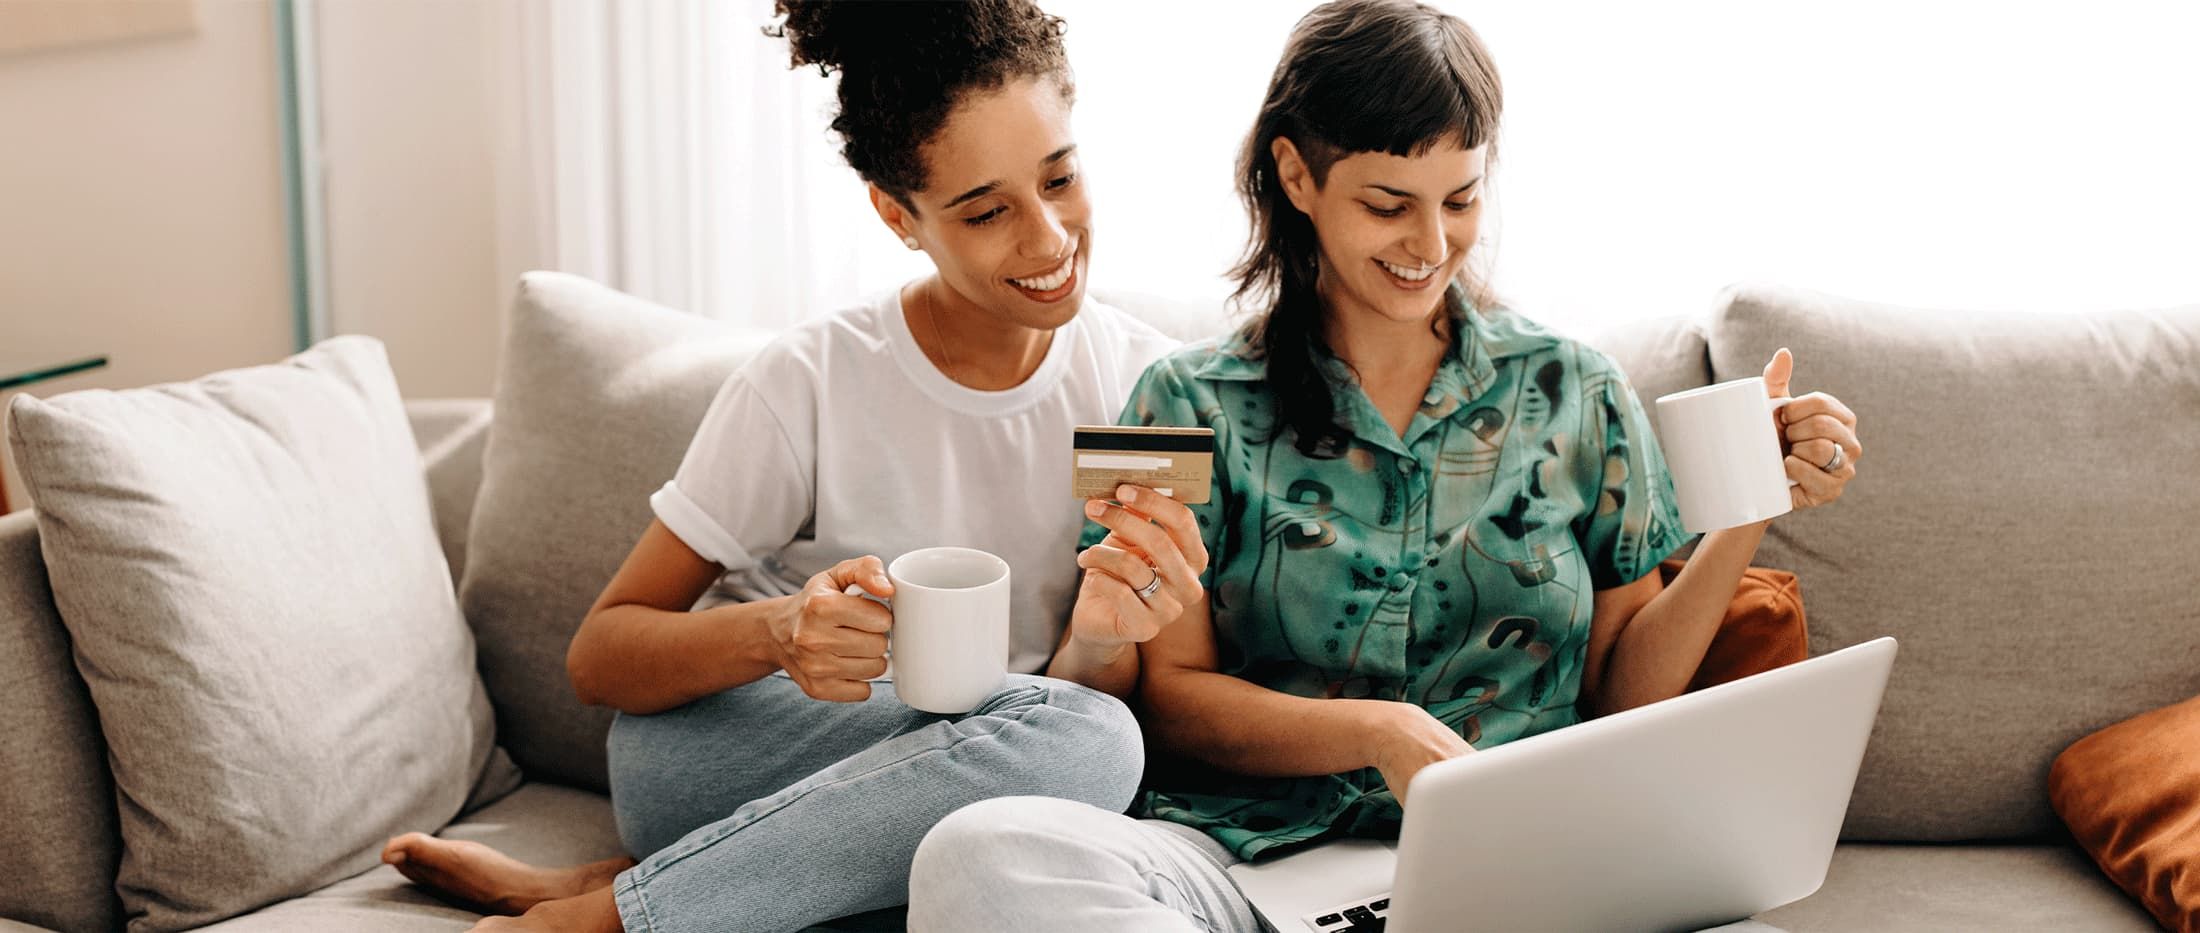 Two women sitting on a couch, one is holding a credit card in their hand, working on their laptop.